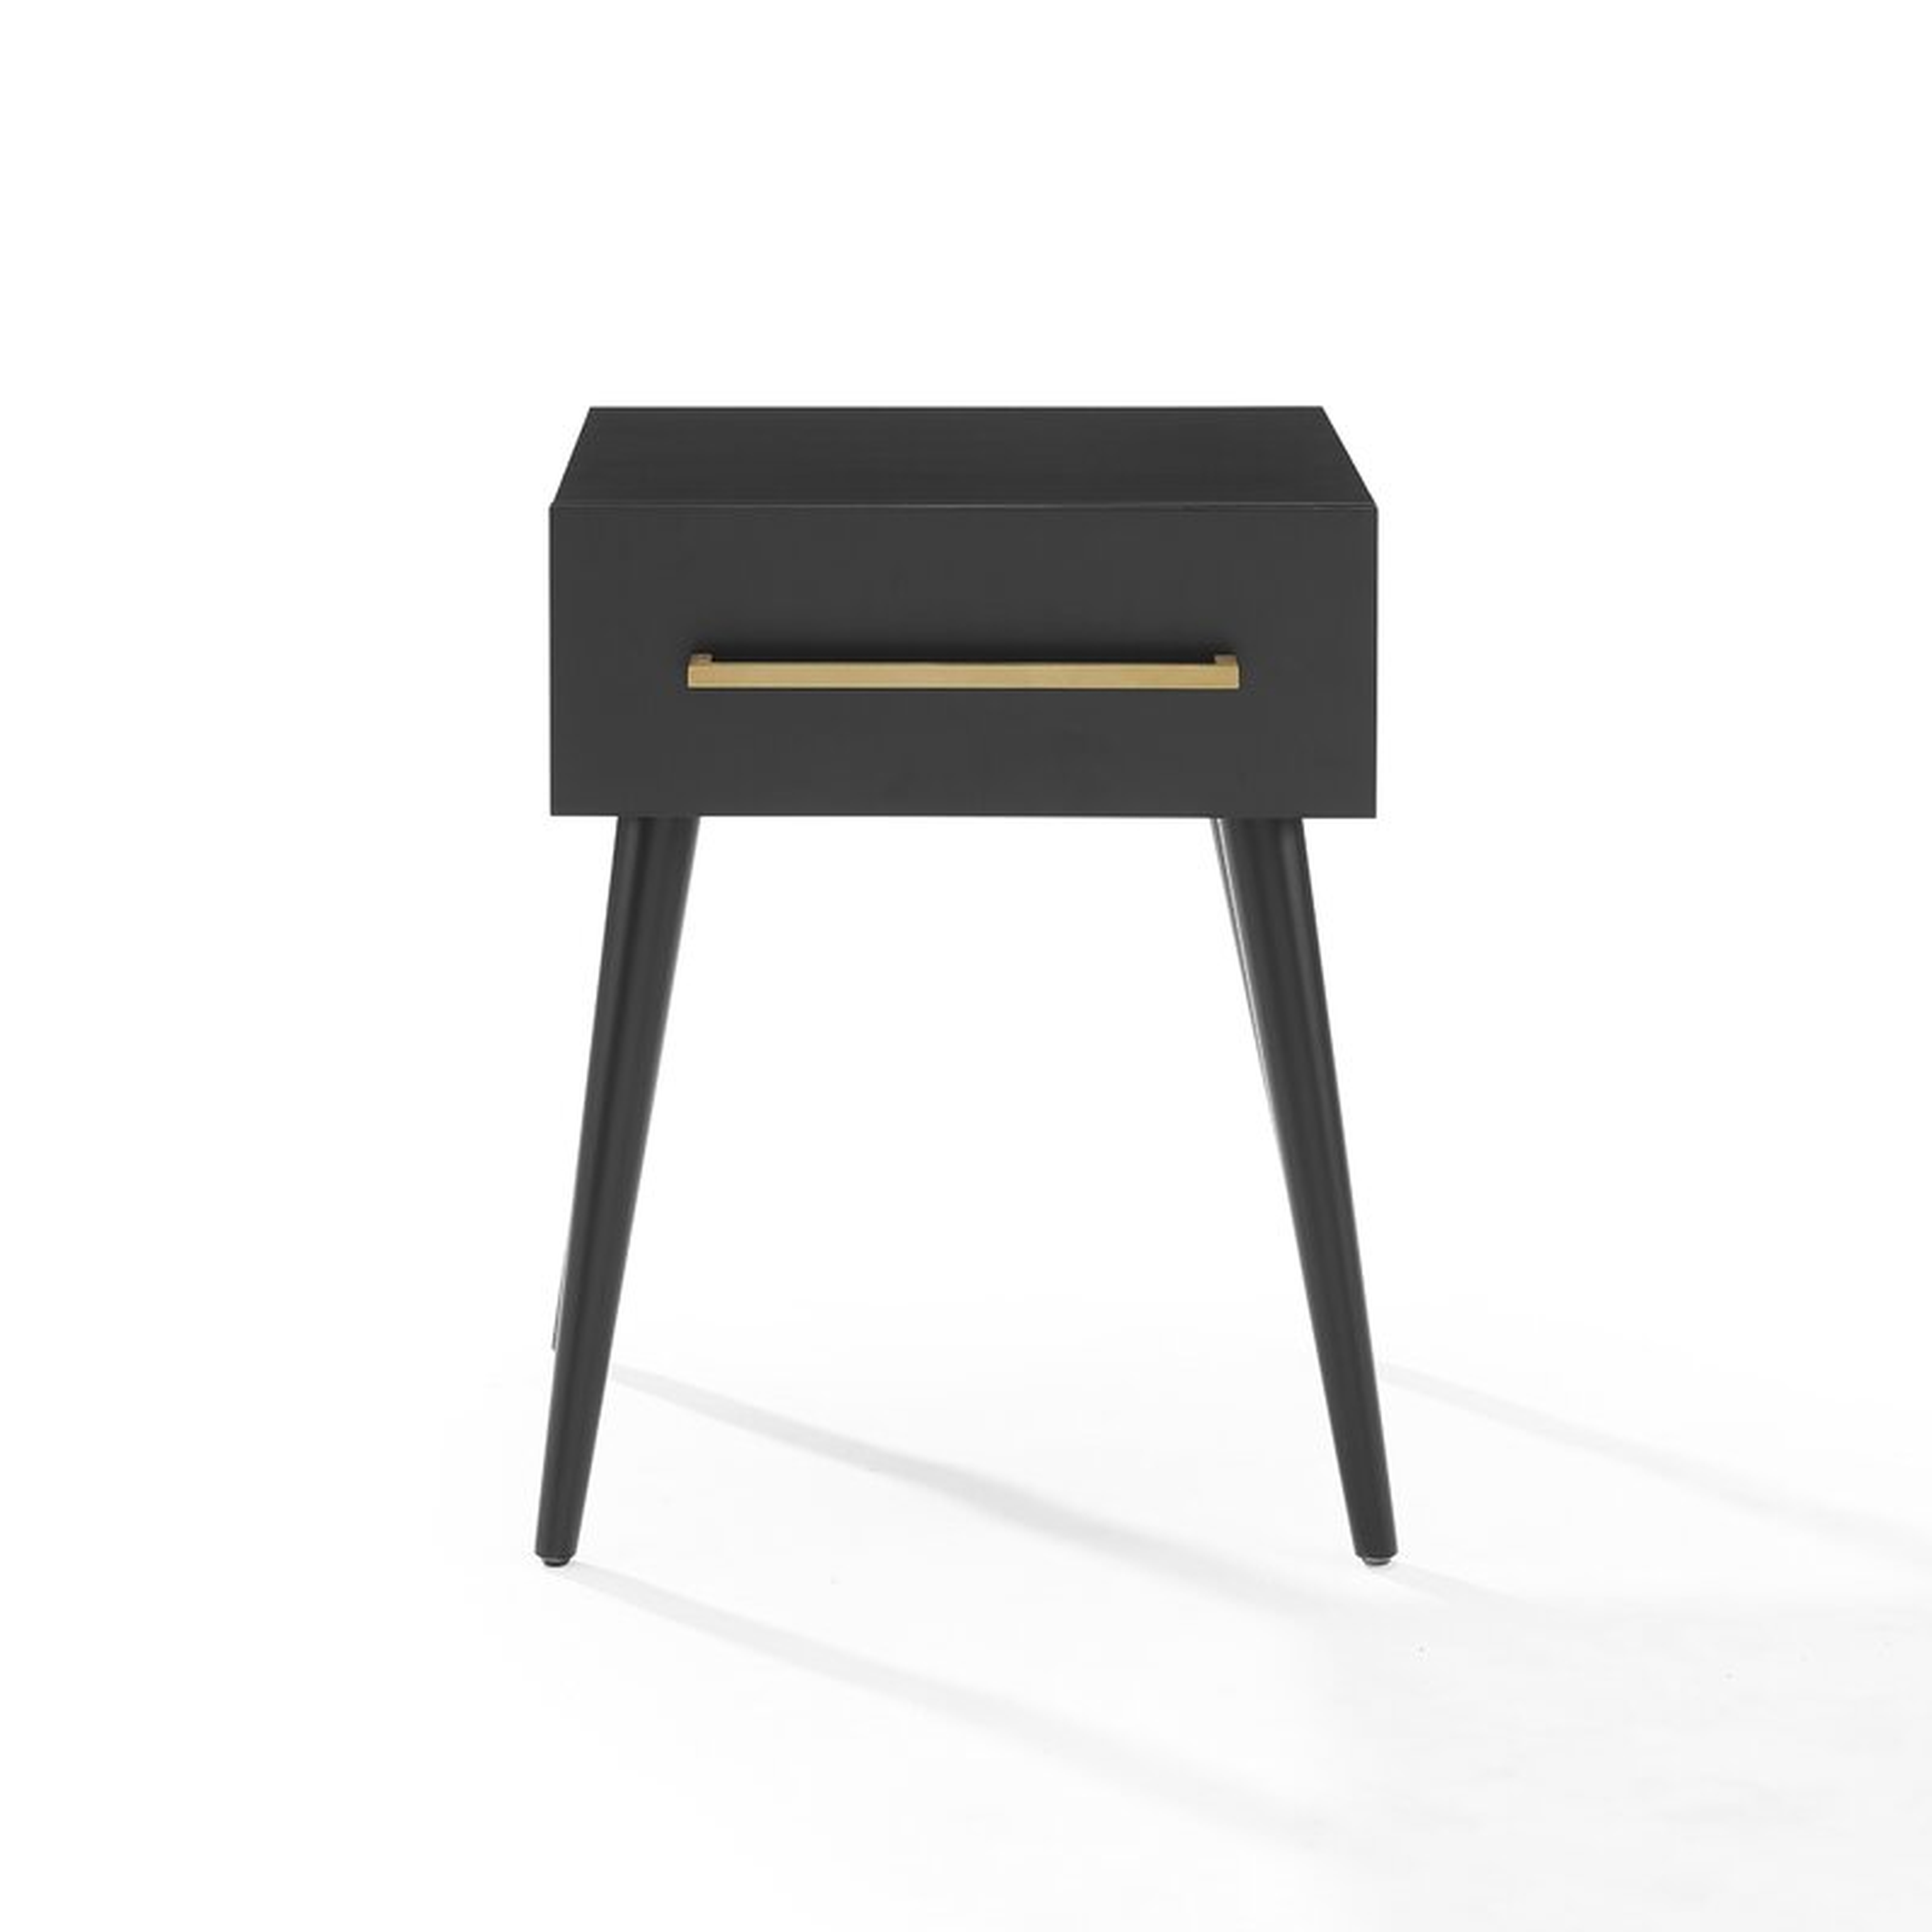 Everett End Table With Storage, Black - Perigold